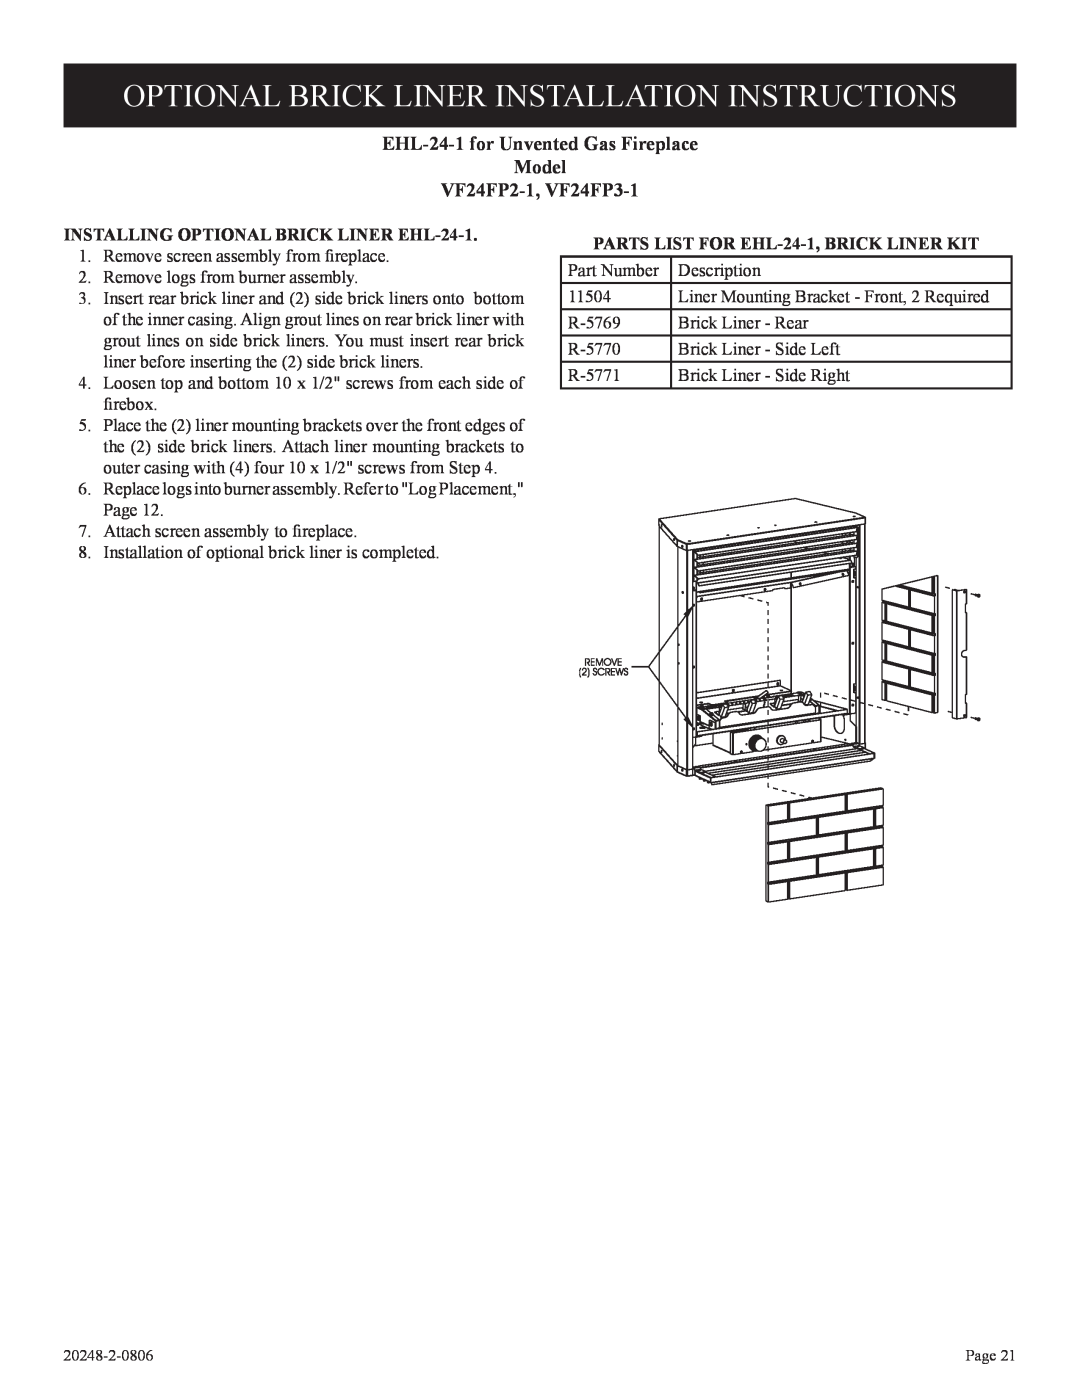 Empire Comfort Systems VF24FP3-1 Optional Brick Liner Installation Instructions, EHL-24-1for Unvented Gas Fireplace Model 